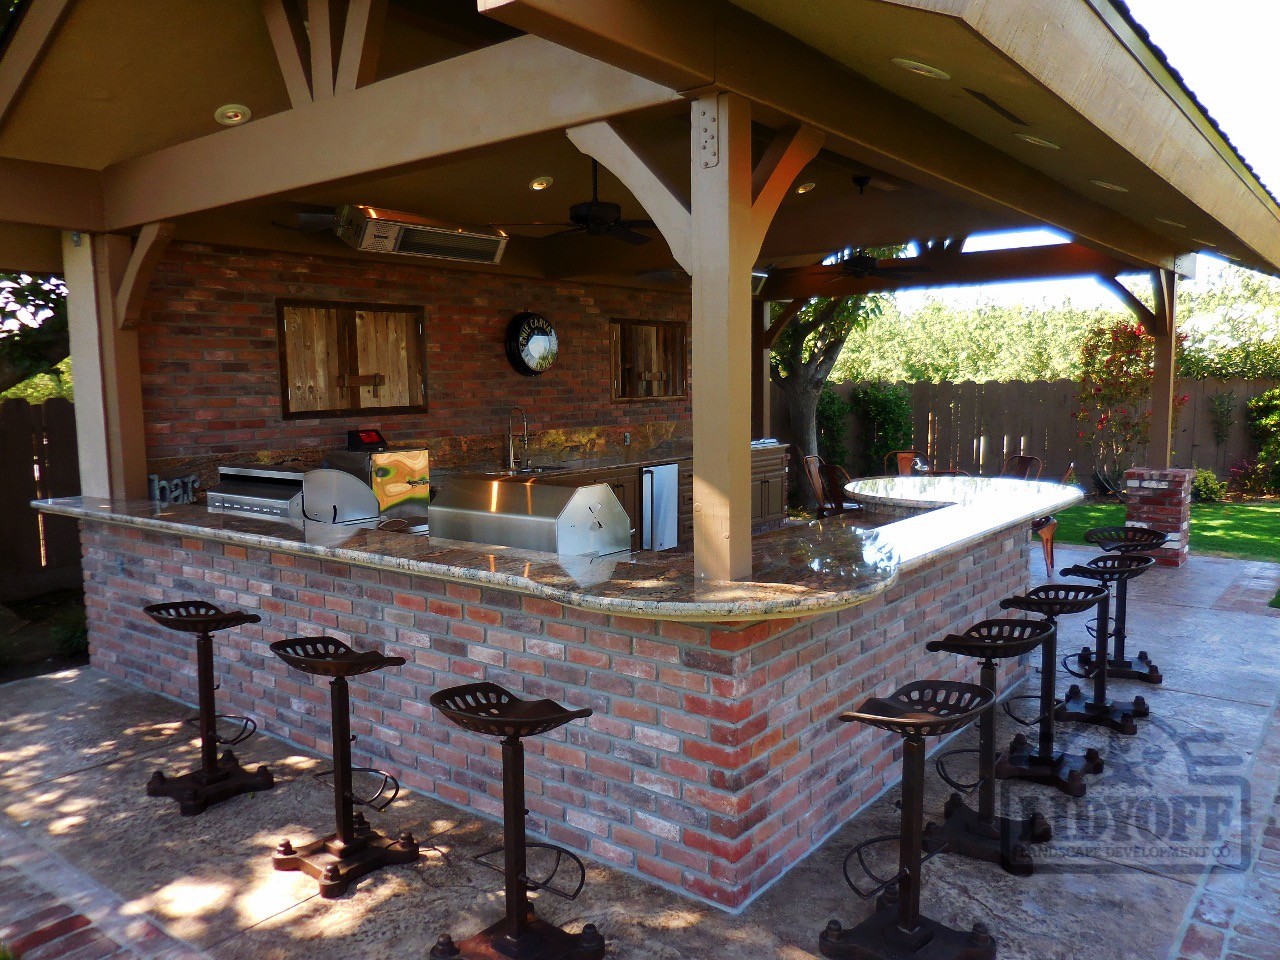 Residential Outdoor Kitchen Installation Services in Carmel-By-The-Sea CA